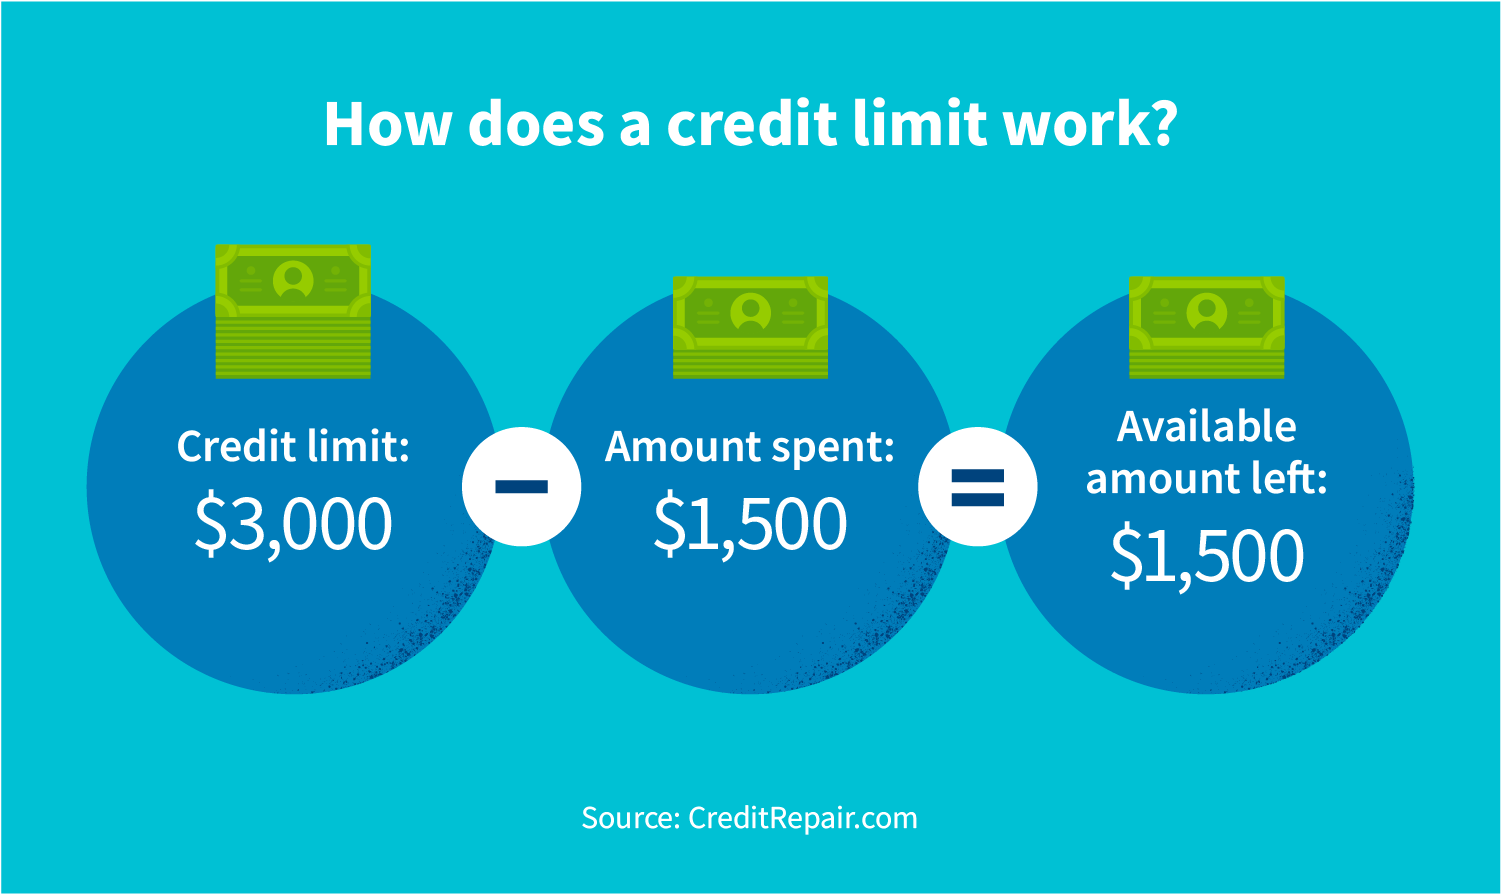 How does a credit limit work?